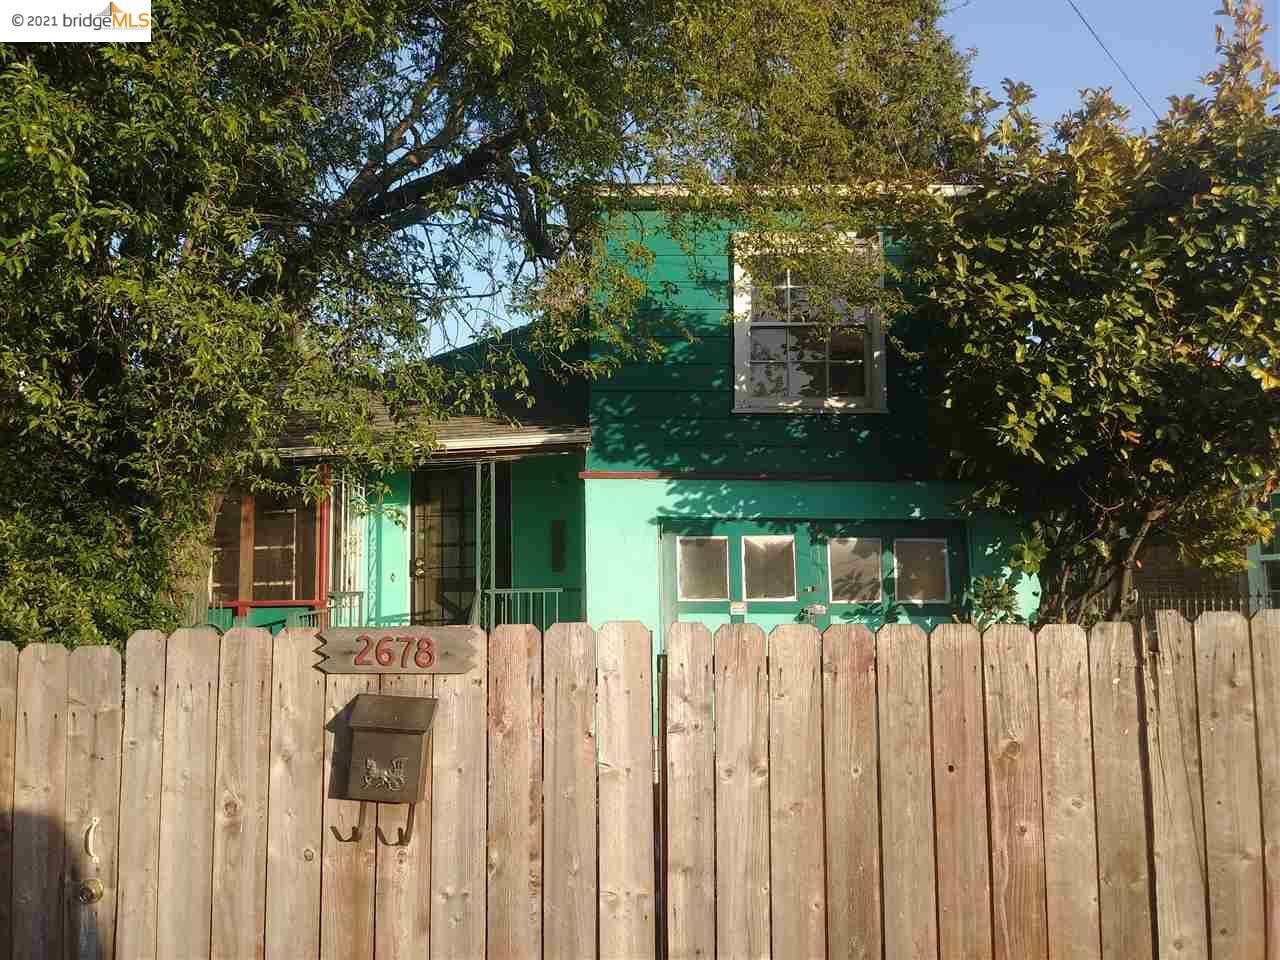 2678 63rd Ave  Oakland CA 94605 photo